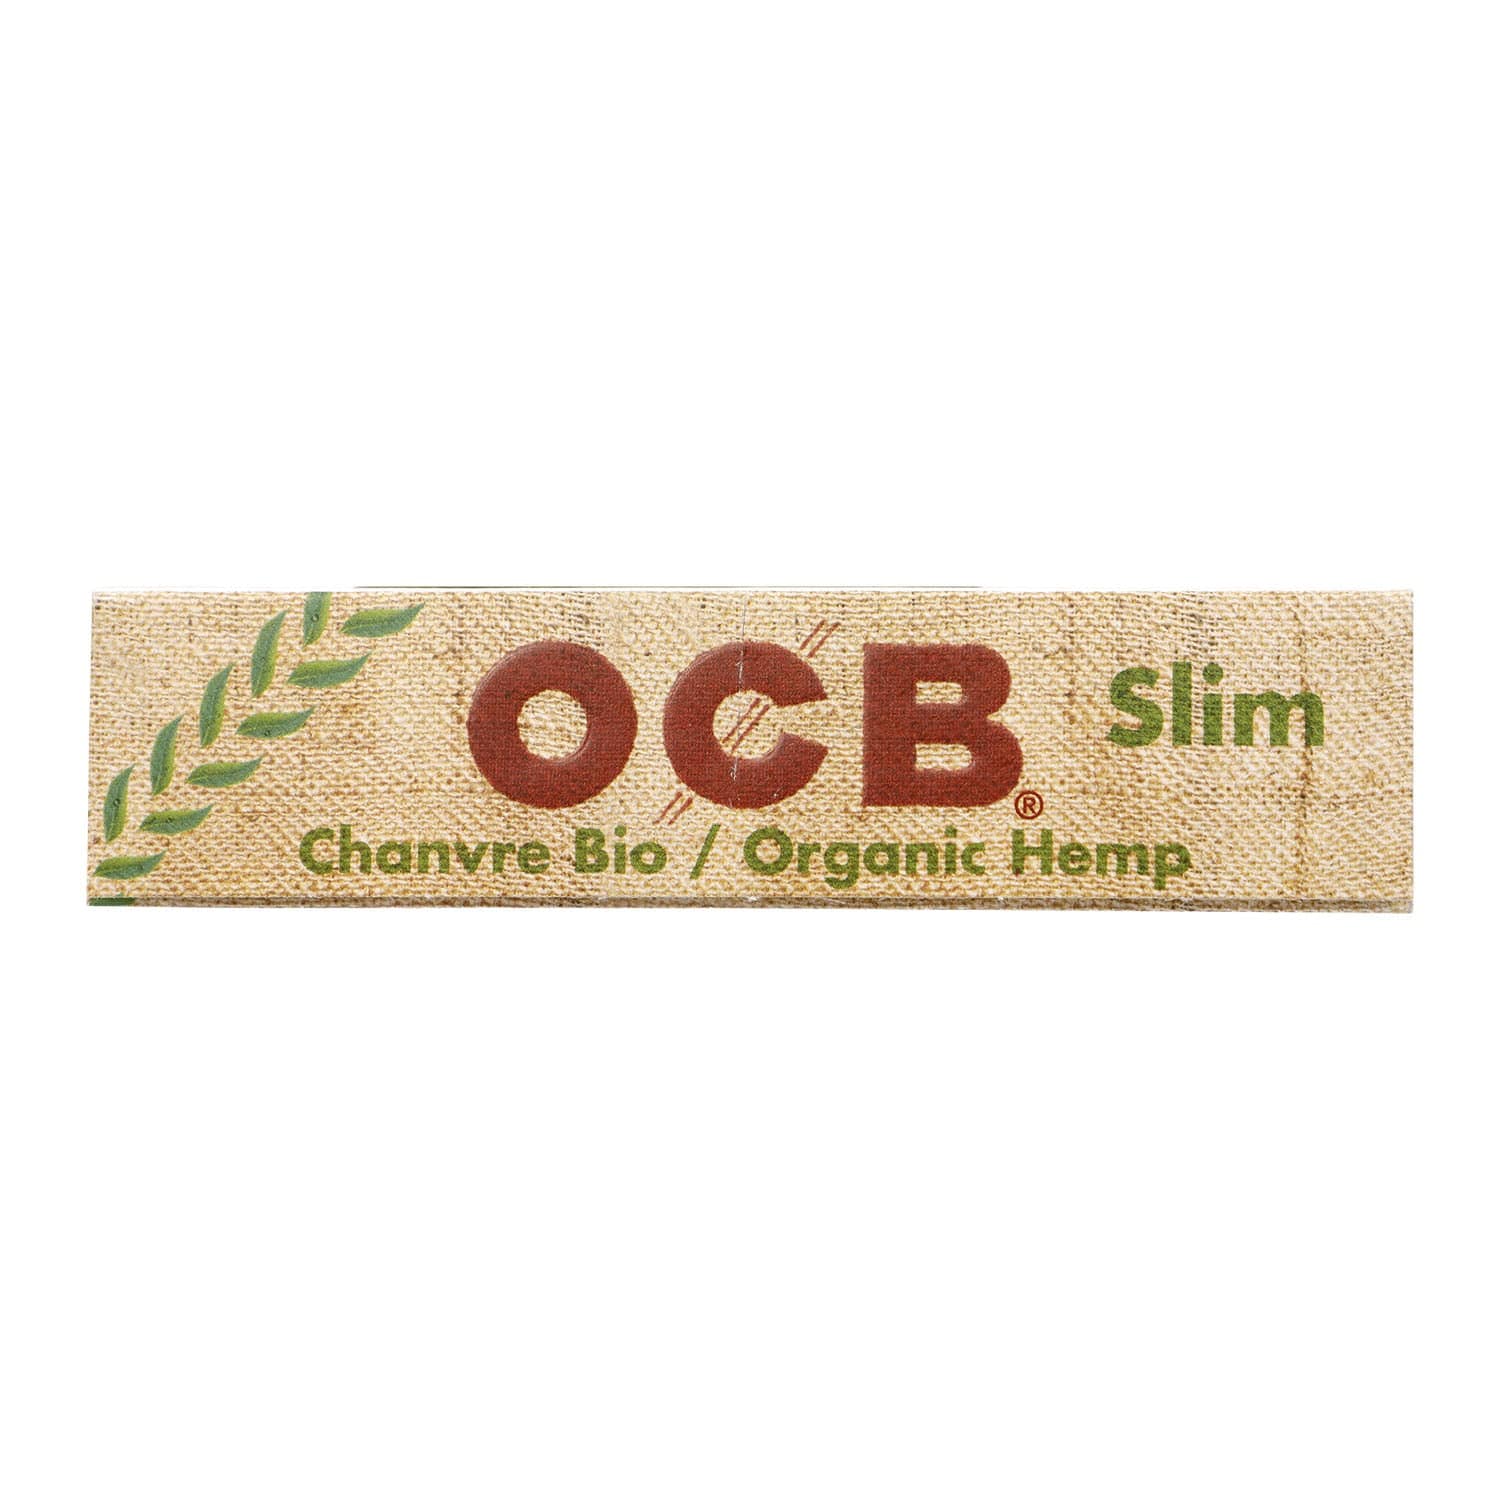 OCB Each Papers